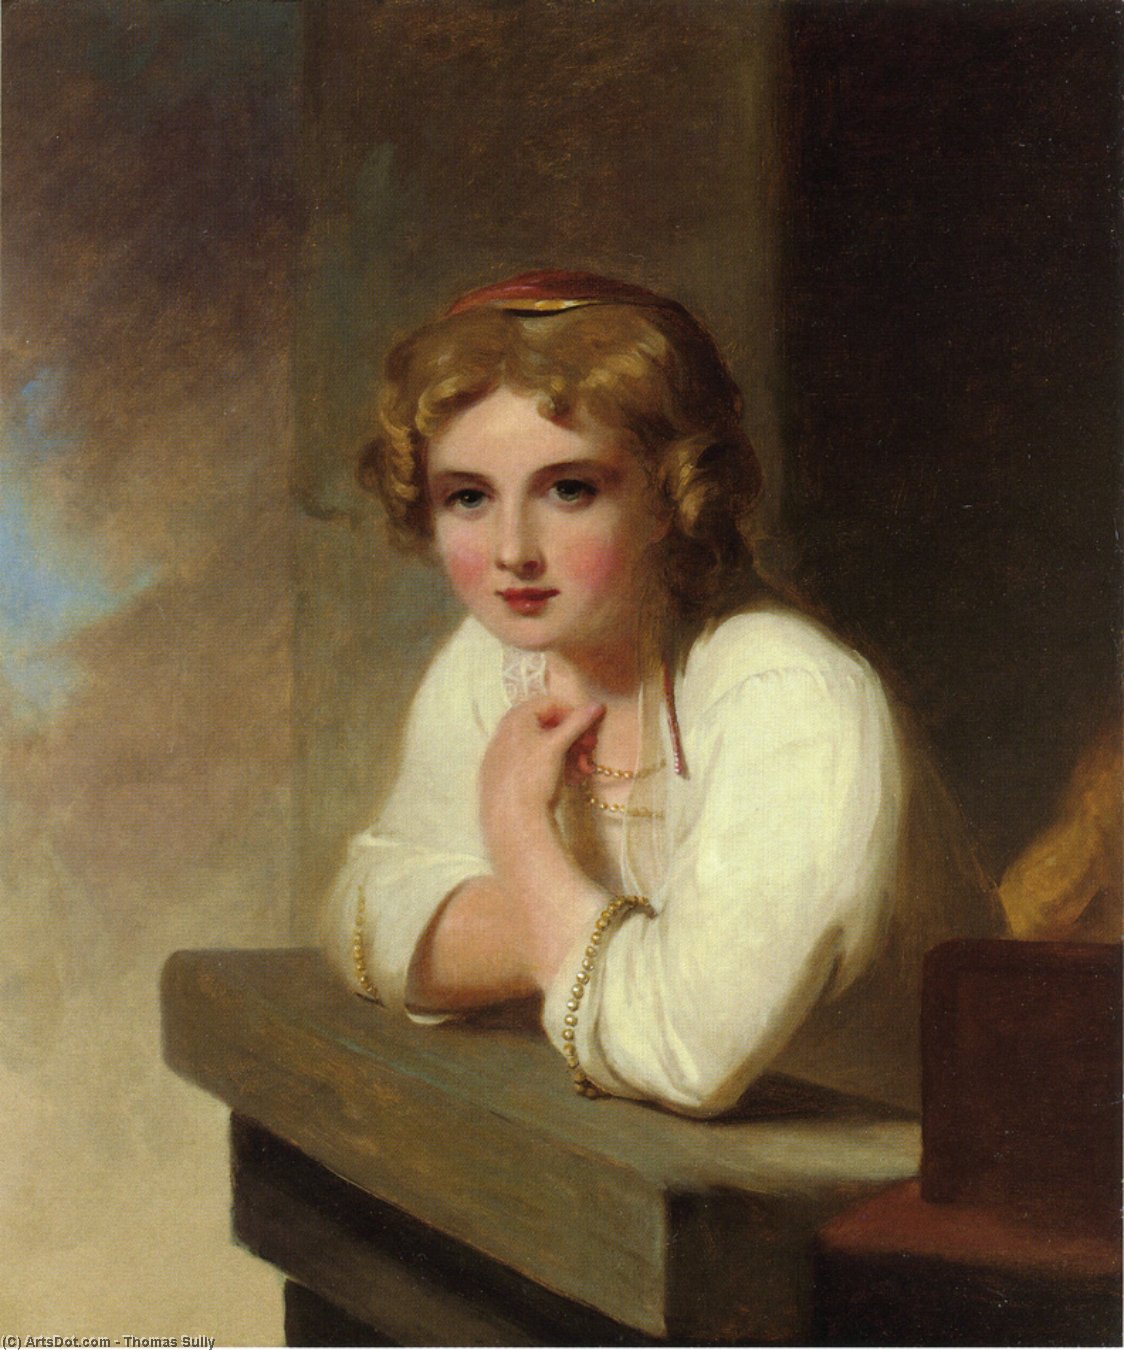 WikiOO.org - Güzel Sanatlar Ansiklopedisi - Resim, Resimler Thomas Sully - Peasant Girl (after Rembrandt's Young Girl Leaning on a Wiindowsill'')''